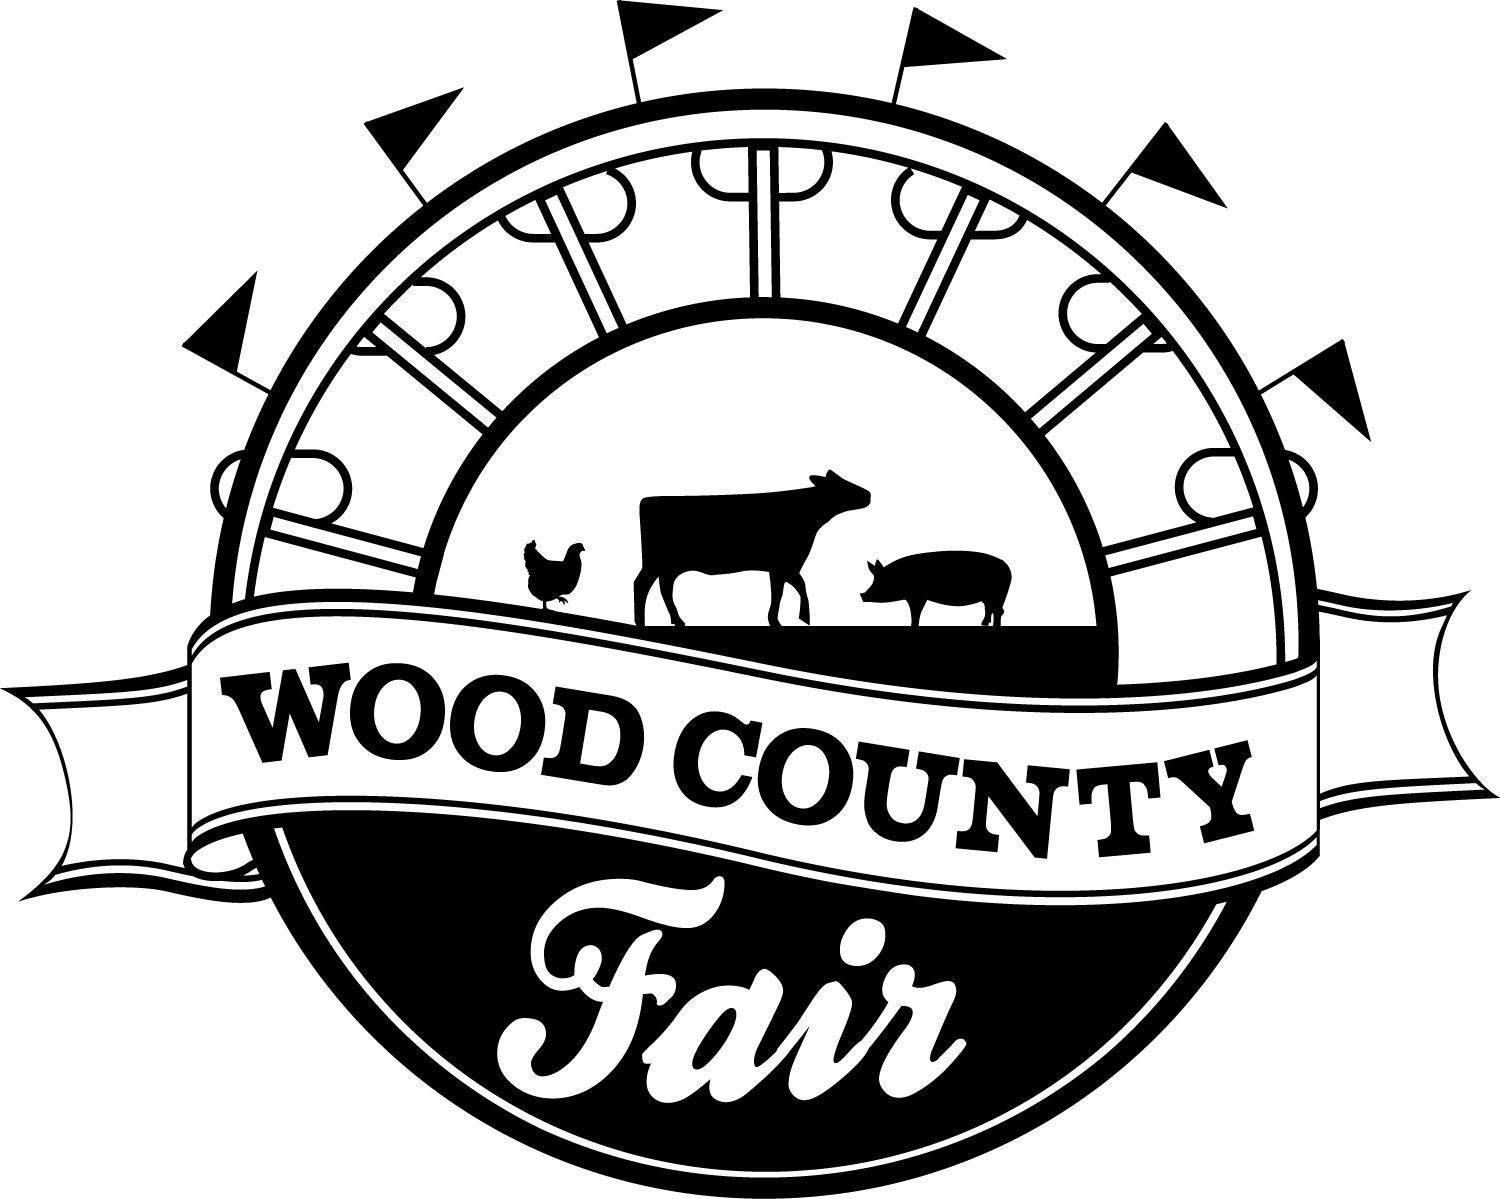 Wood County Fair Eclipse Camping Event cover image